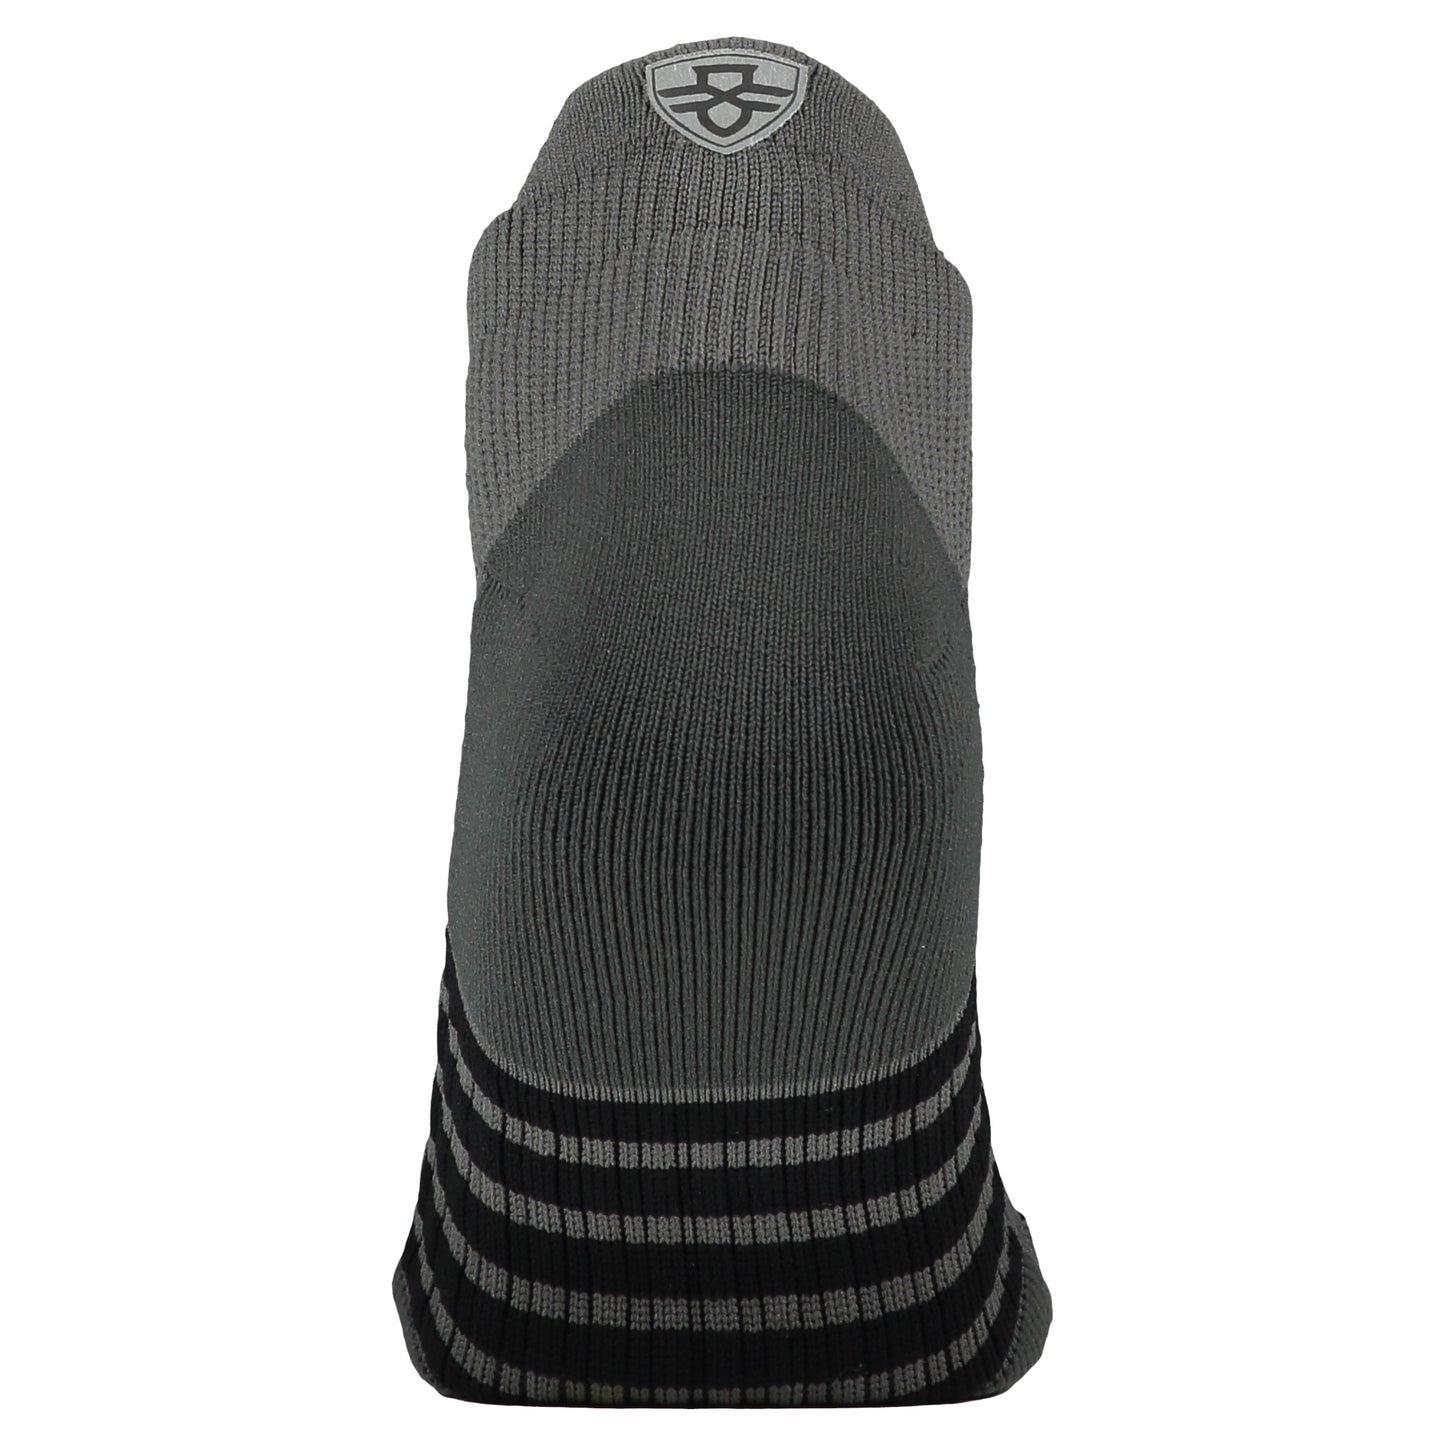 Crossfly men's Vent Low Socks in grey / black from the Performance series, featuring AirVent and AirBeams.